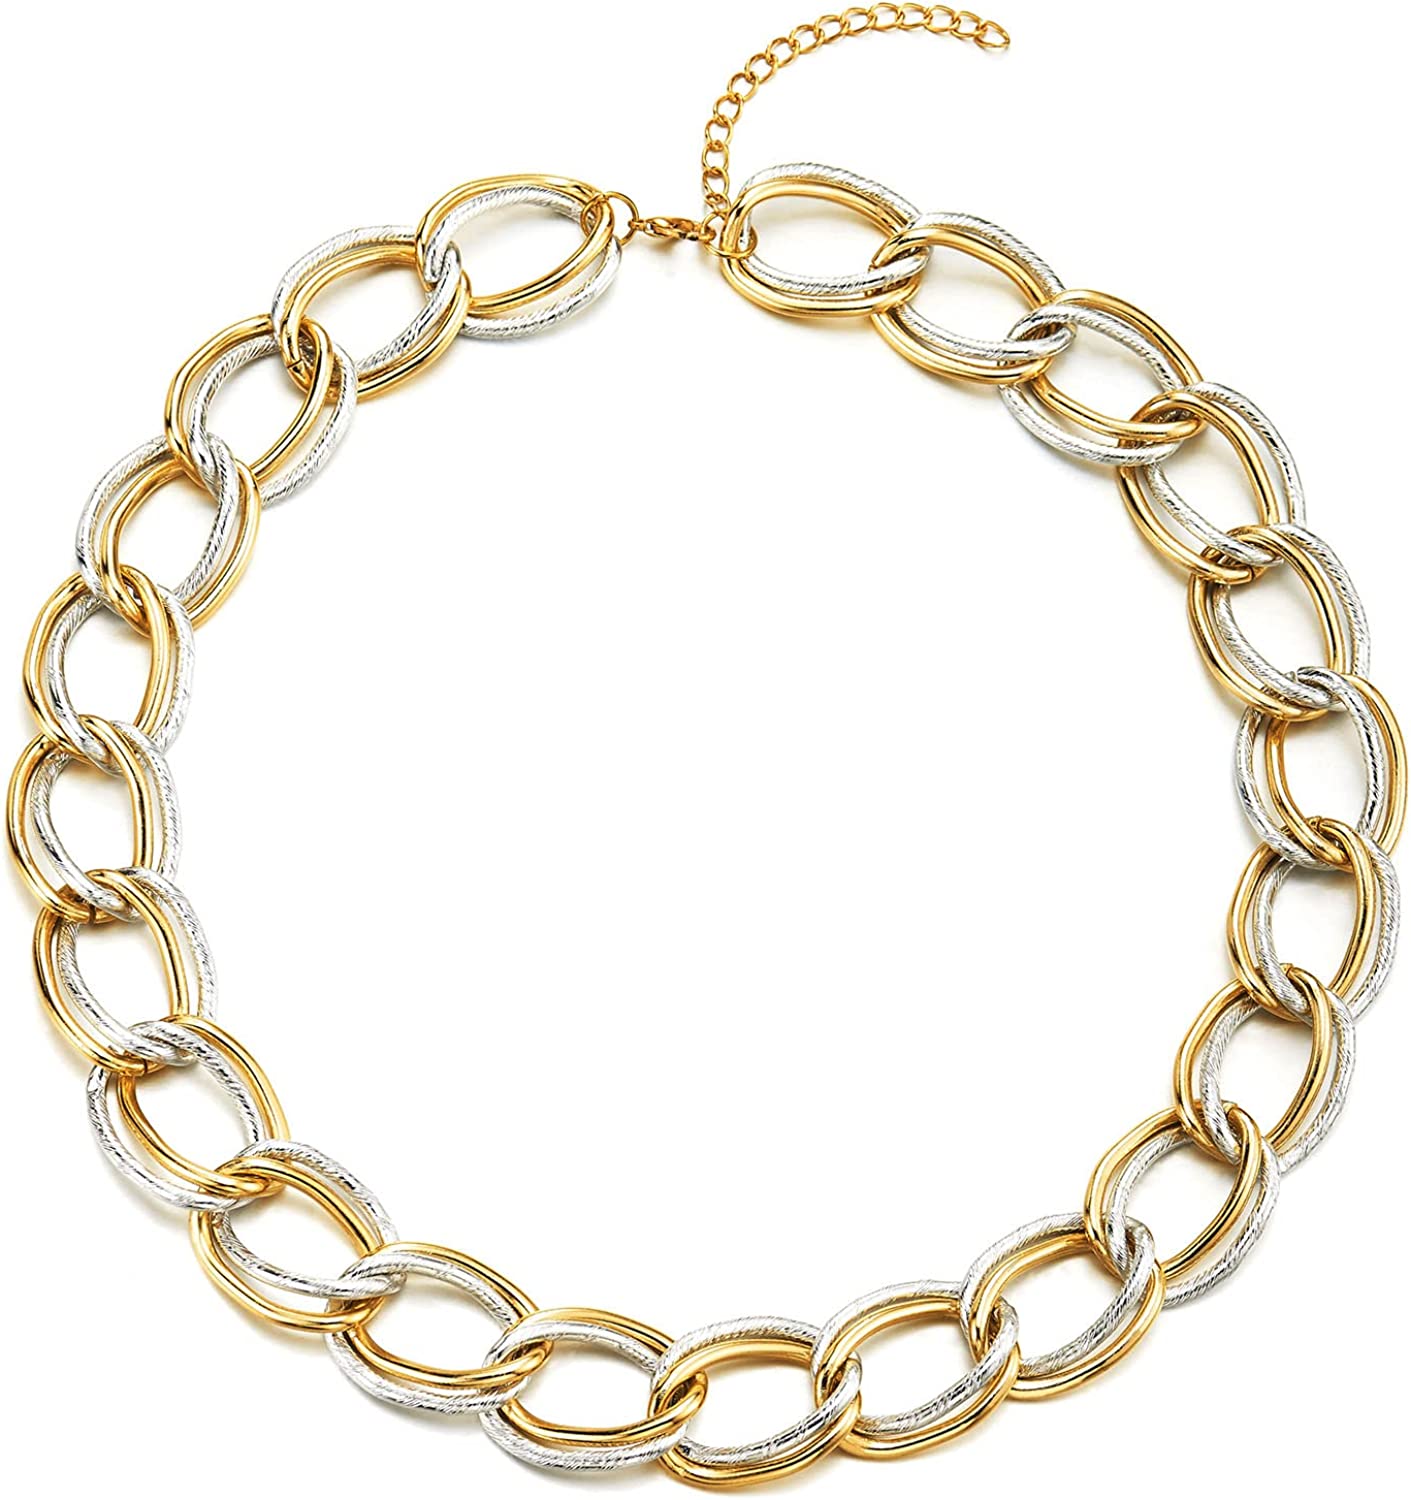 COOLSTEELANDBEYOND Silver Gold Link Chain Statement Necklace, Double Textured Circles Large Collar Necklace Party Dress